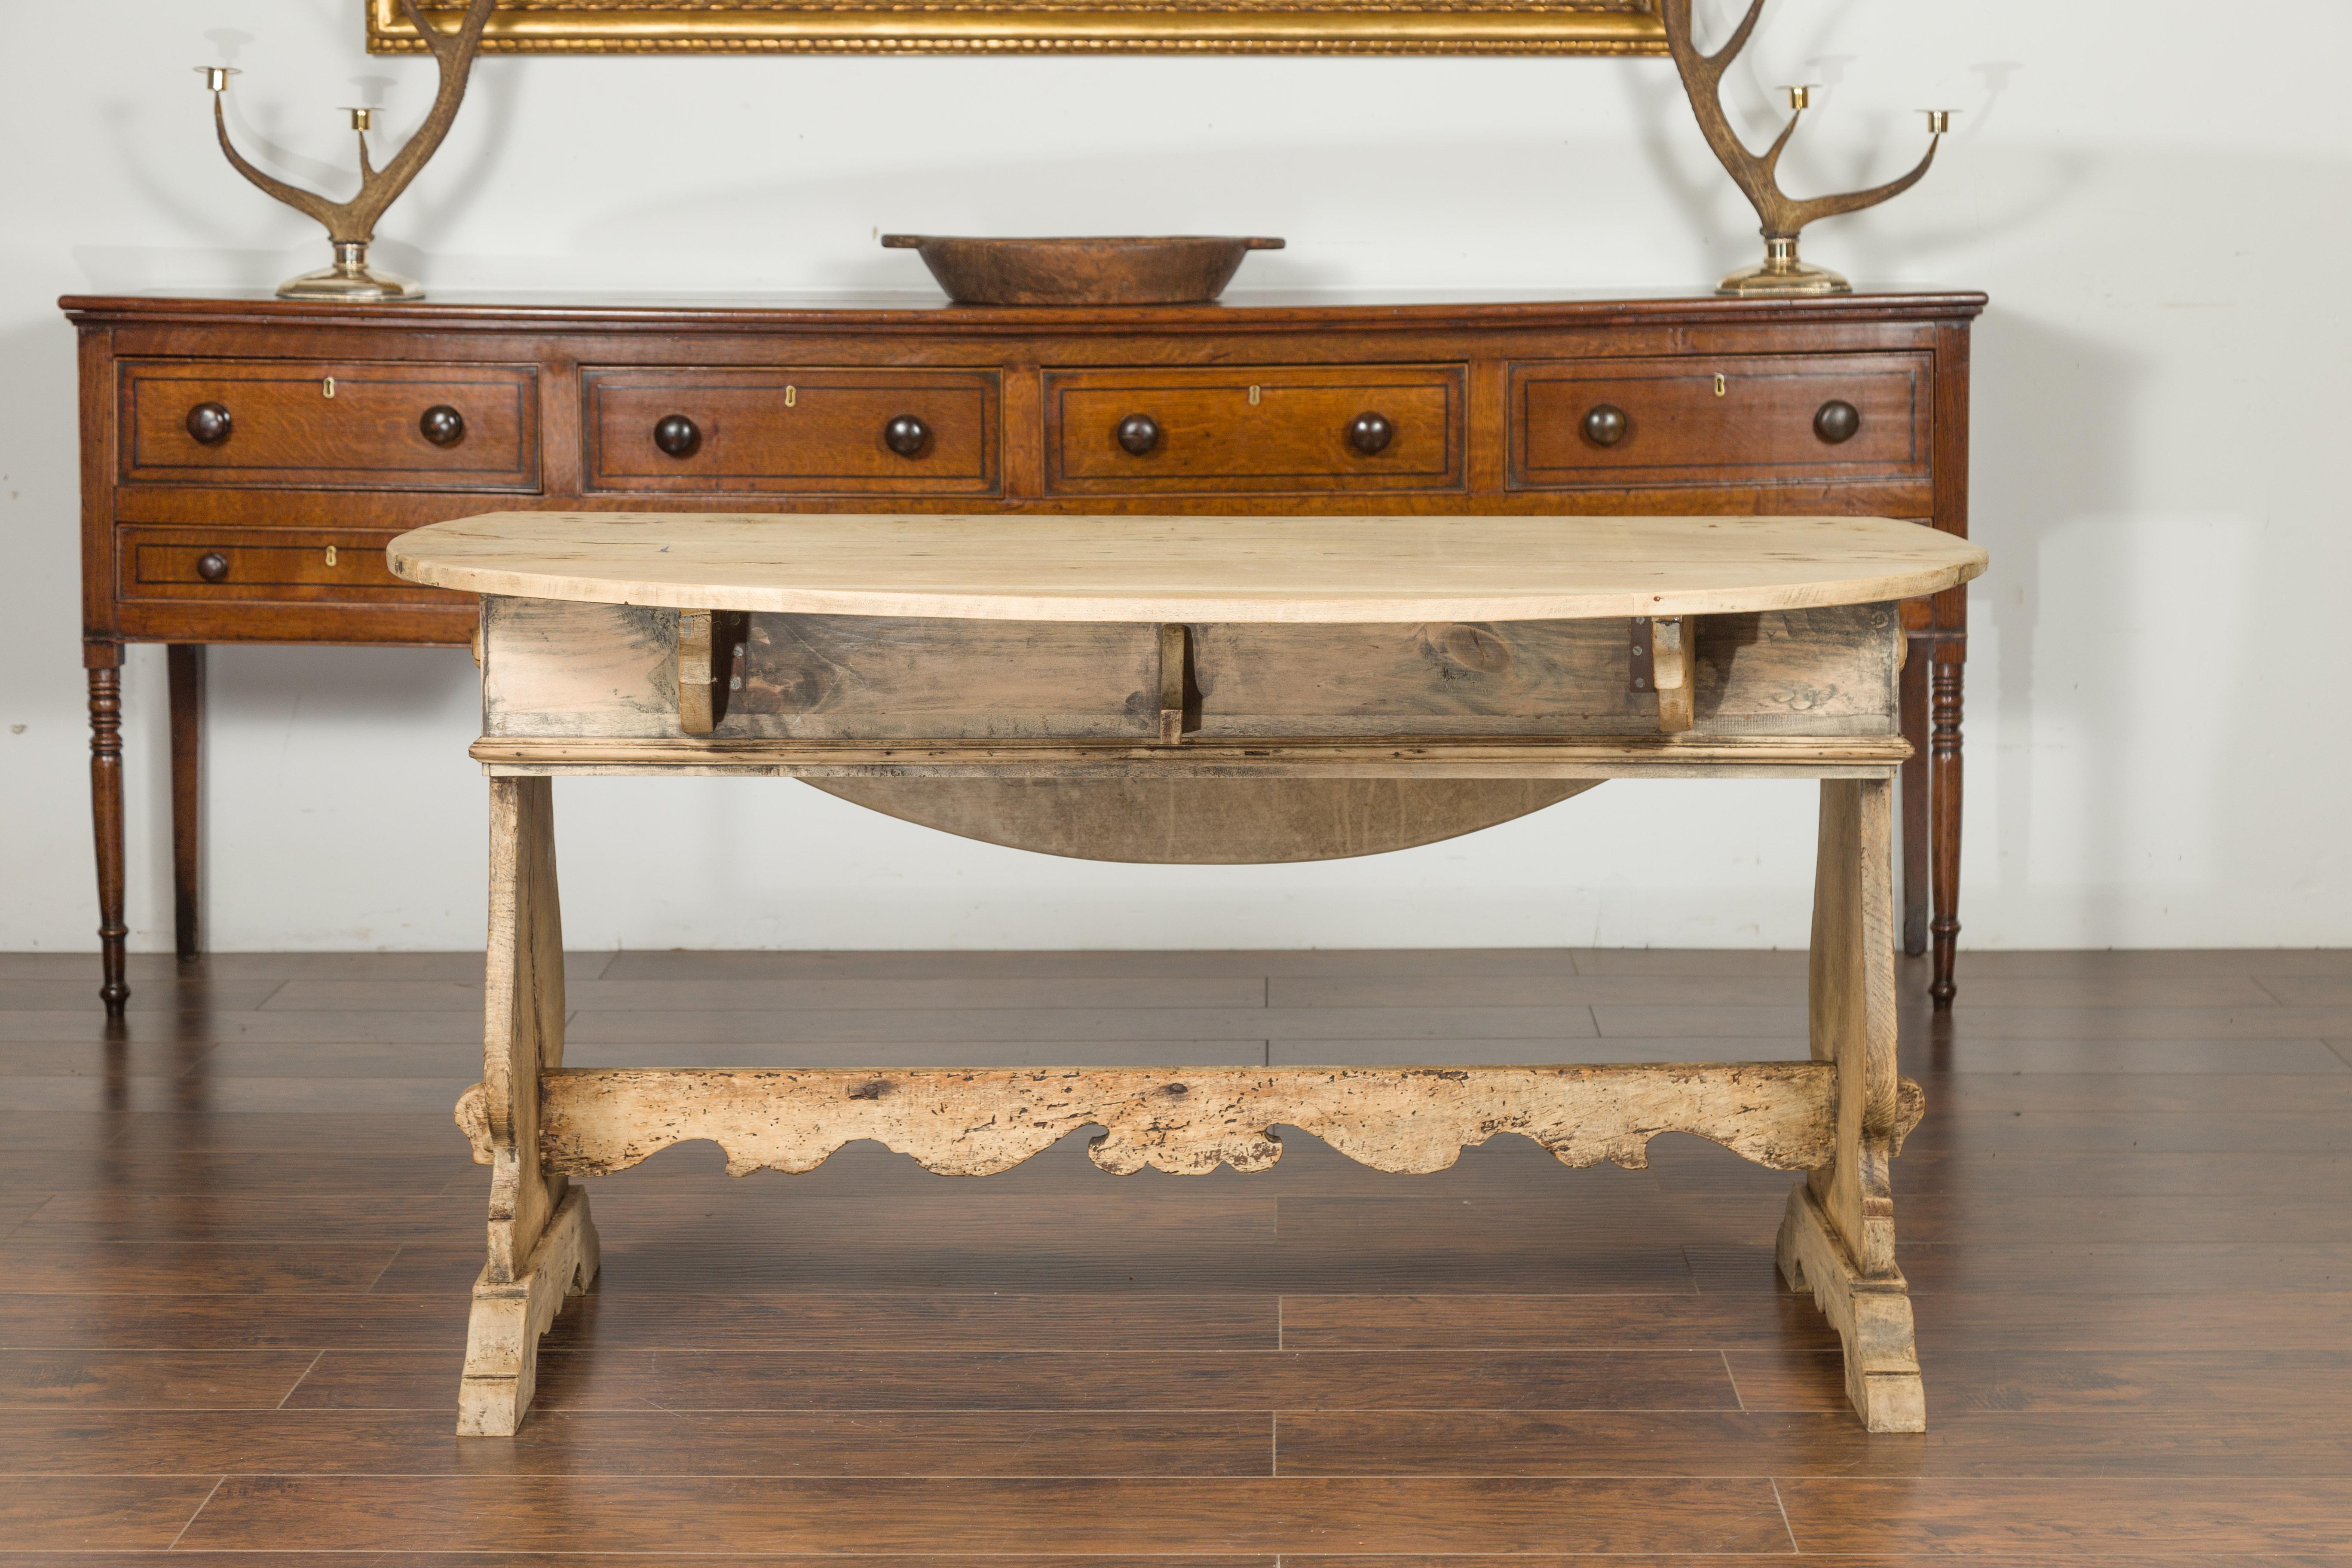 Oval Italian 1800s Bleached Walnut Drop-Leaf Trestle Table with Drawers For Sale 13